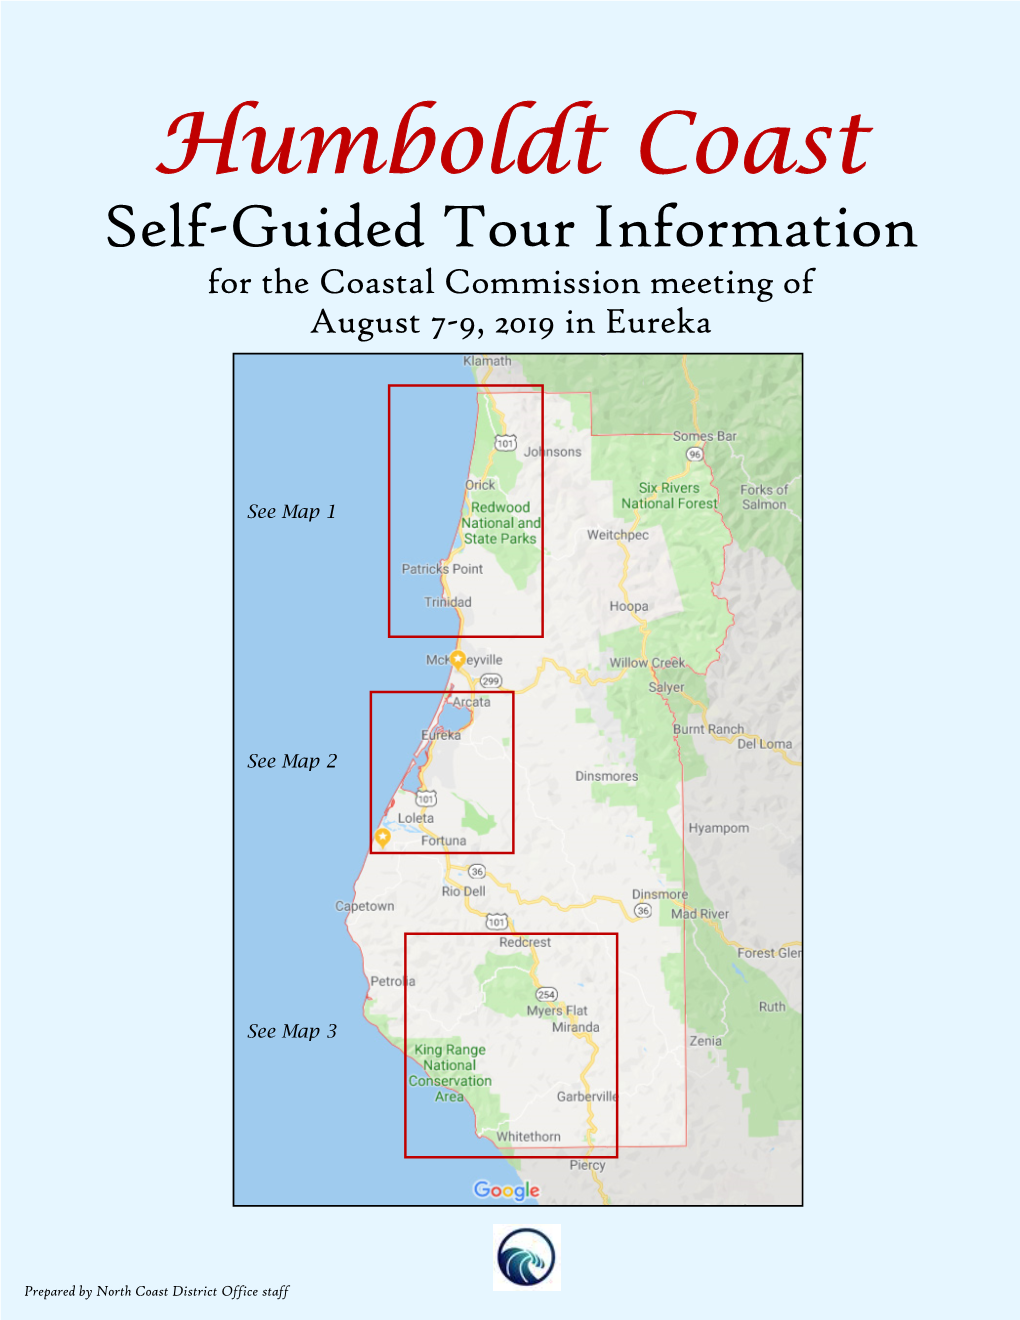 Mendocino County Self-Guided Tour Information for the Coastal